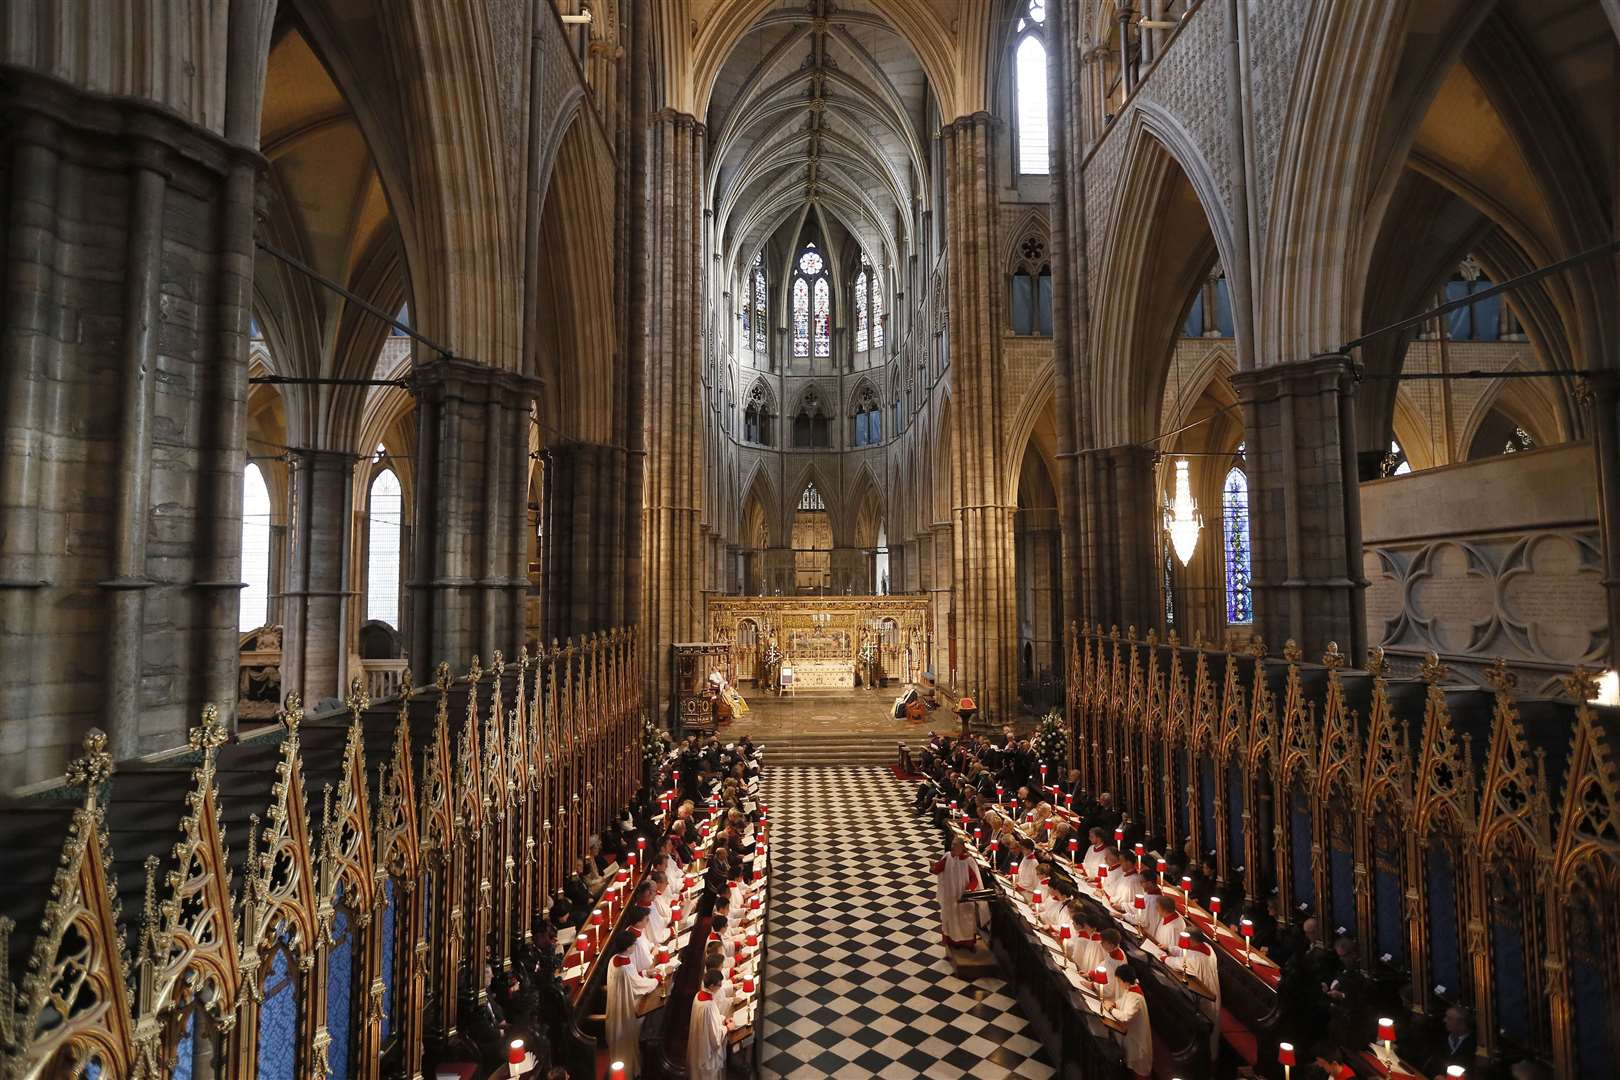 The Abbey has just come through its longest closure since the Queen’s Coronation nearly 70 years ago (Kirsty Wrigglesworth/PA)